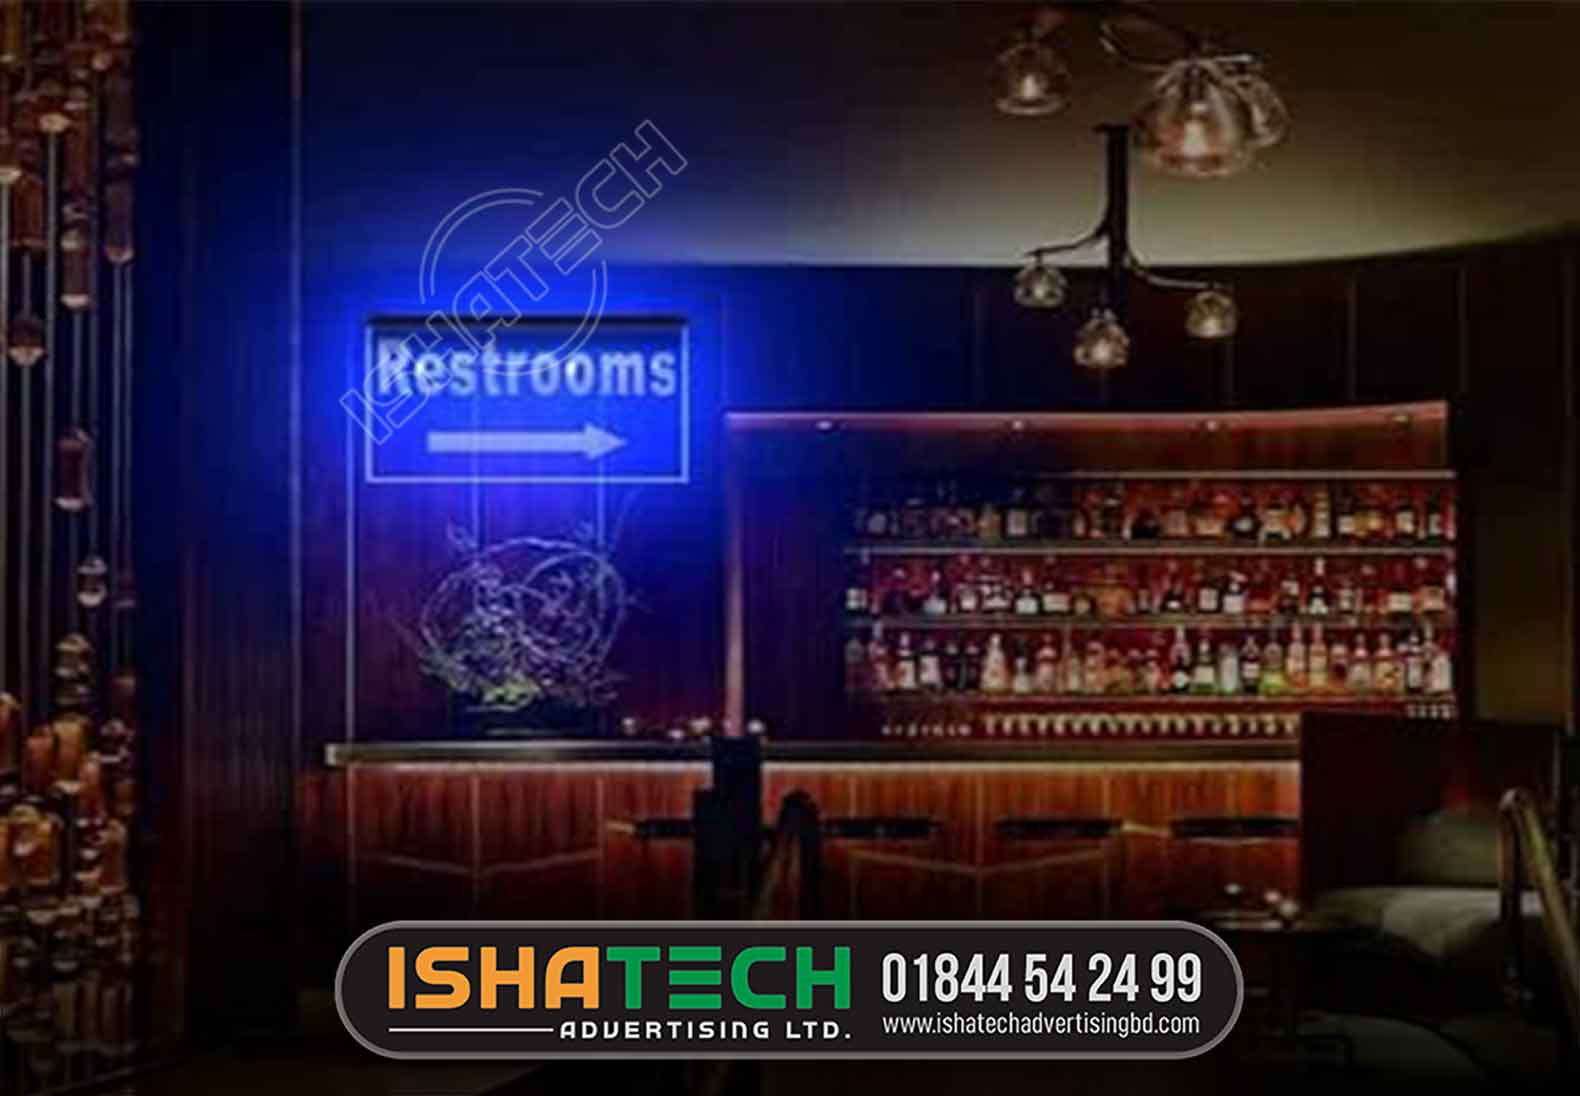 RESTROOM LED LETTER DIRECTIONAL SIGNS, SIGNBOARD COMPANY IN DHAKA, BANGLADESH